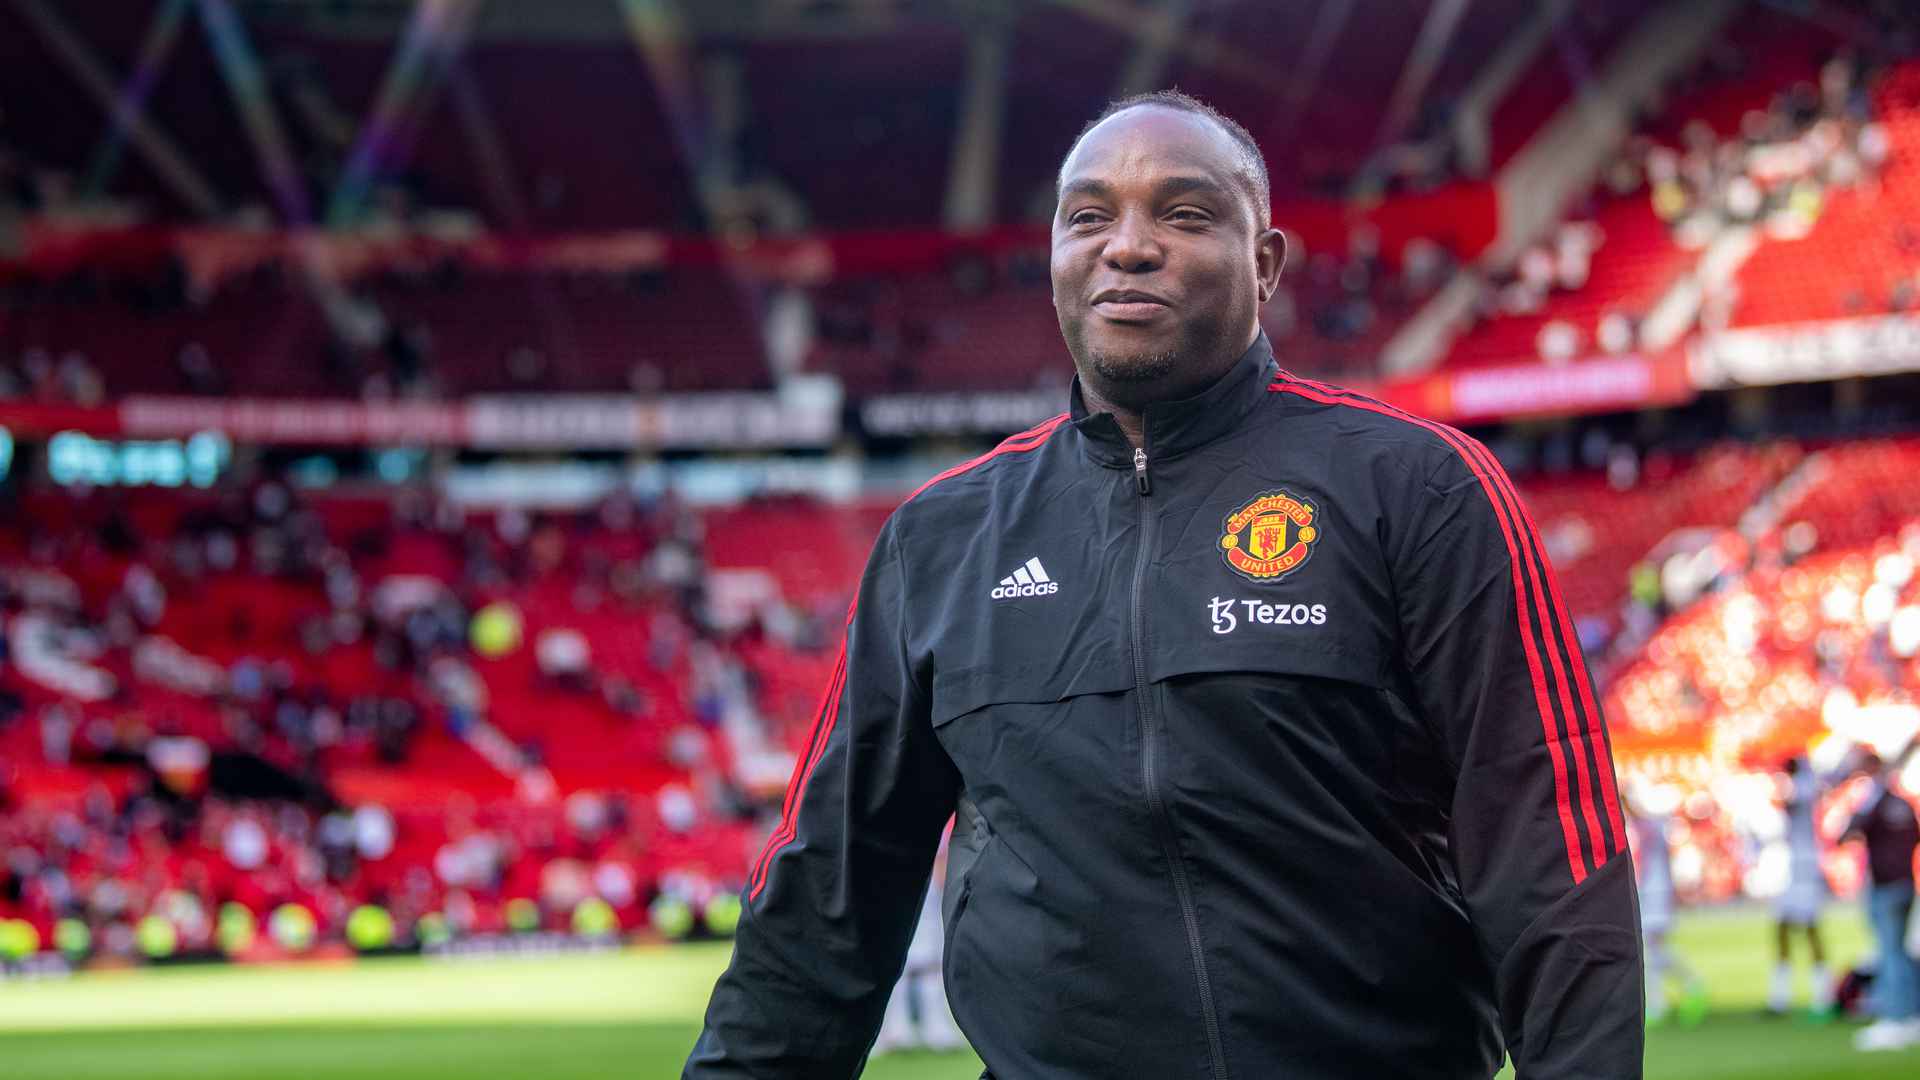 Benni McCarthy hopes to make a difference in Man Utd coaching role |  Manchester United